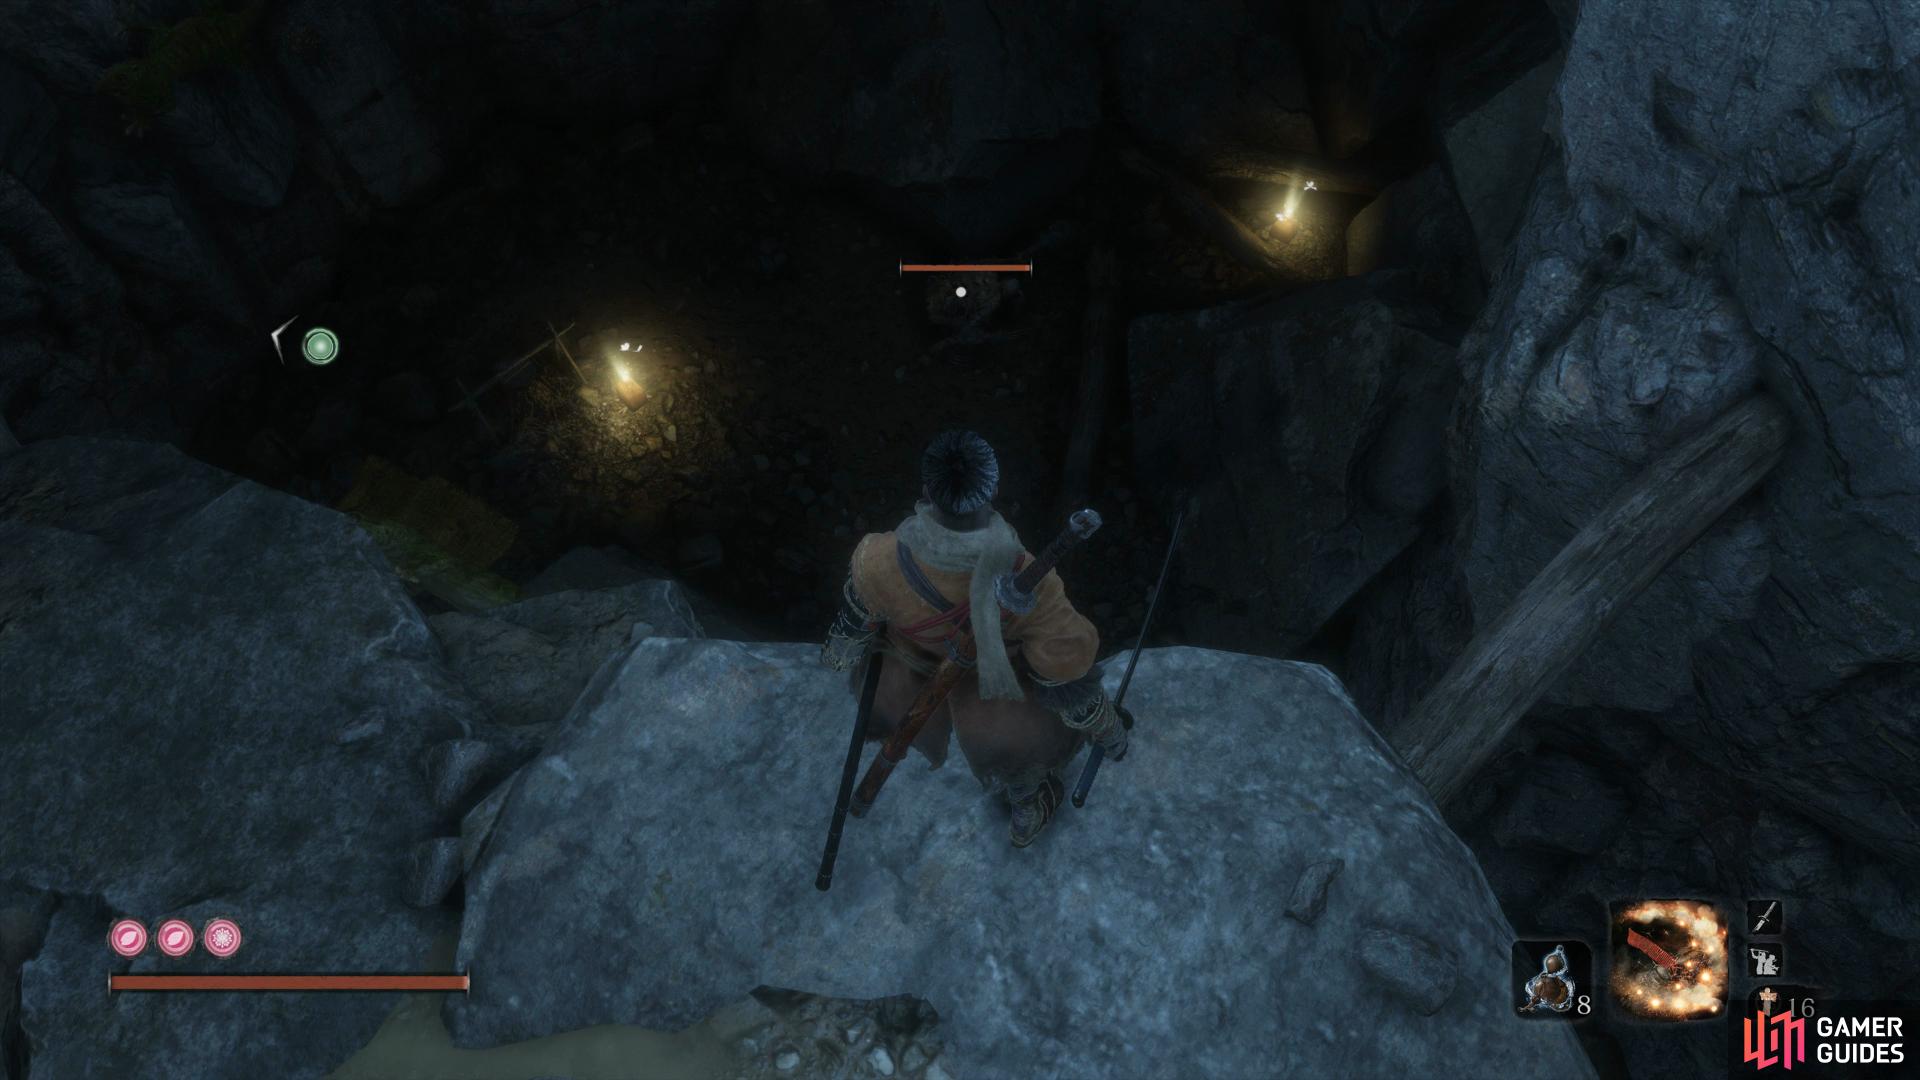 Follow the cave system to a dead end to find another Prayer Bead.